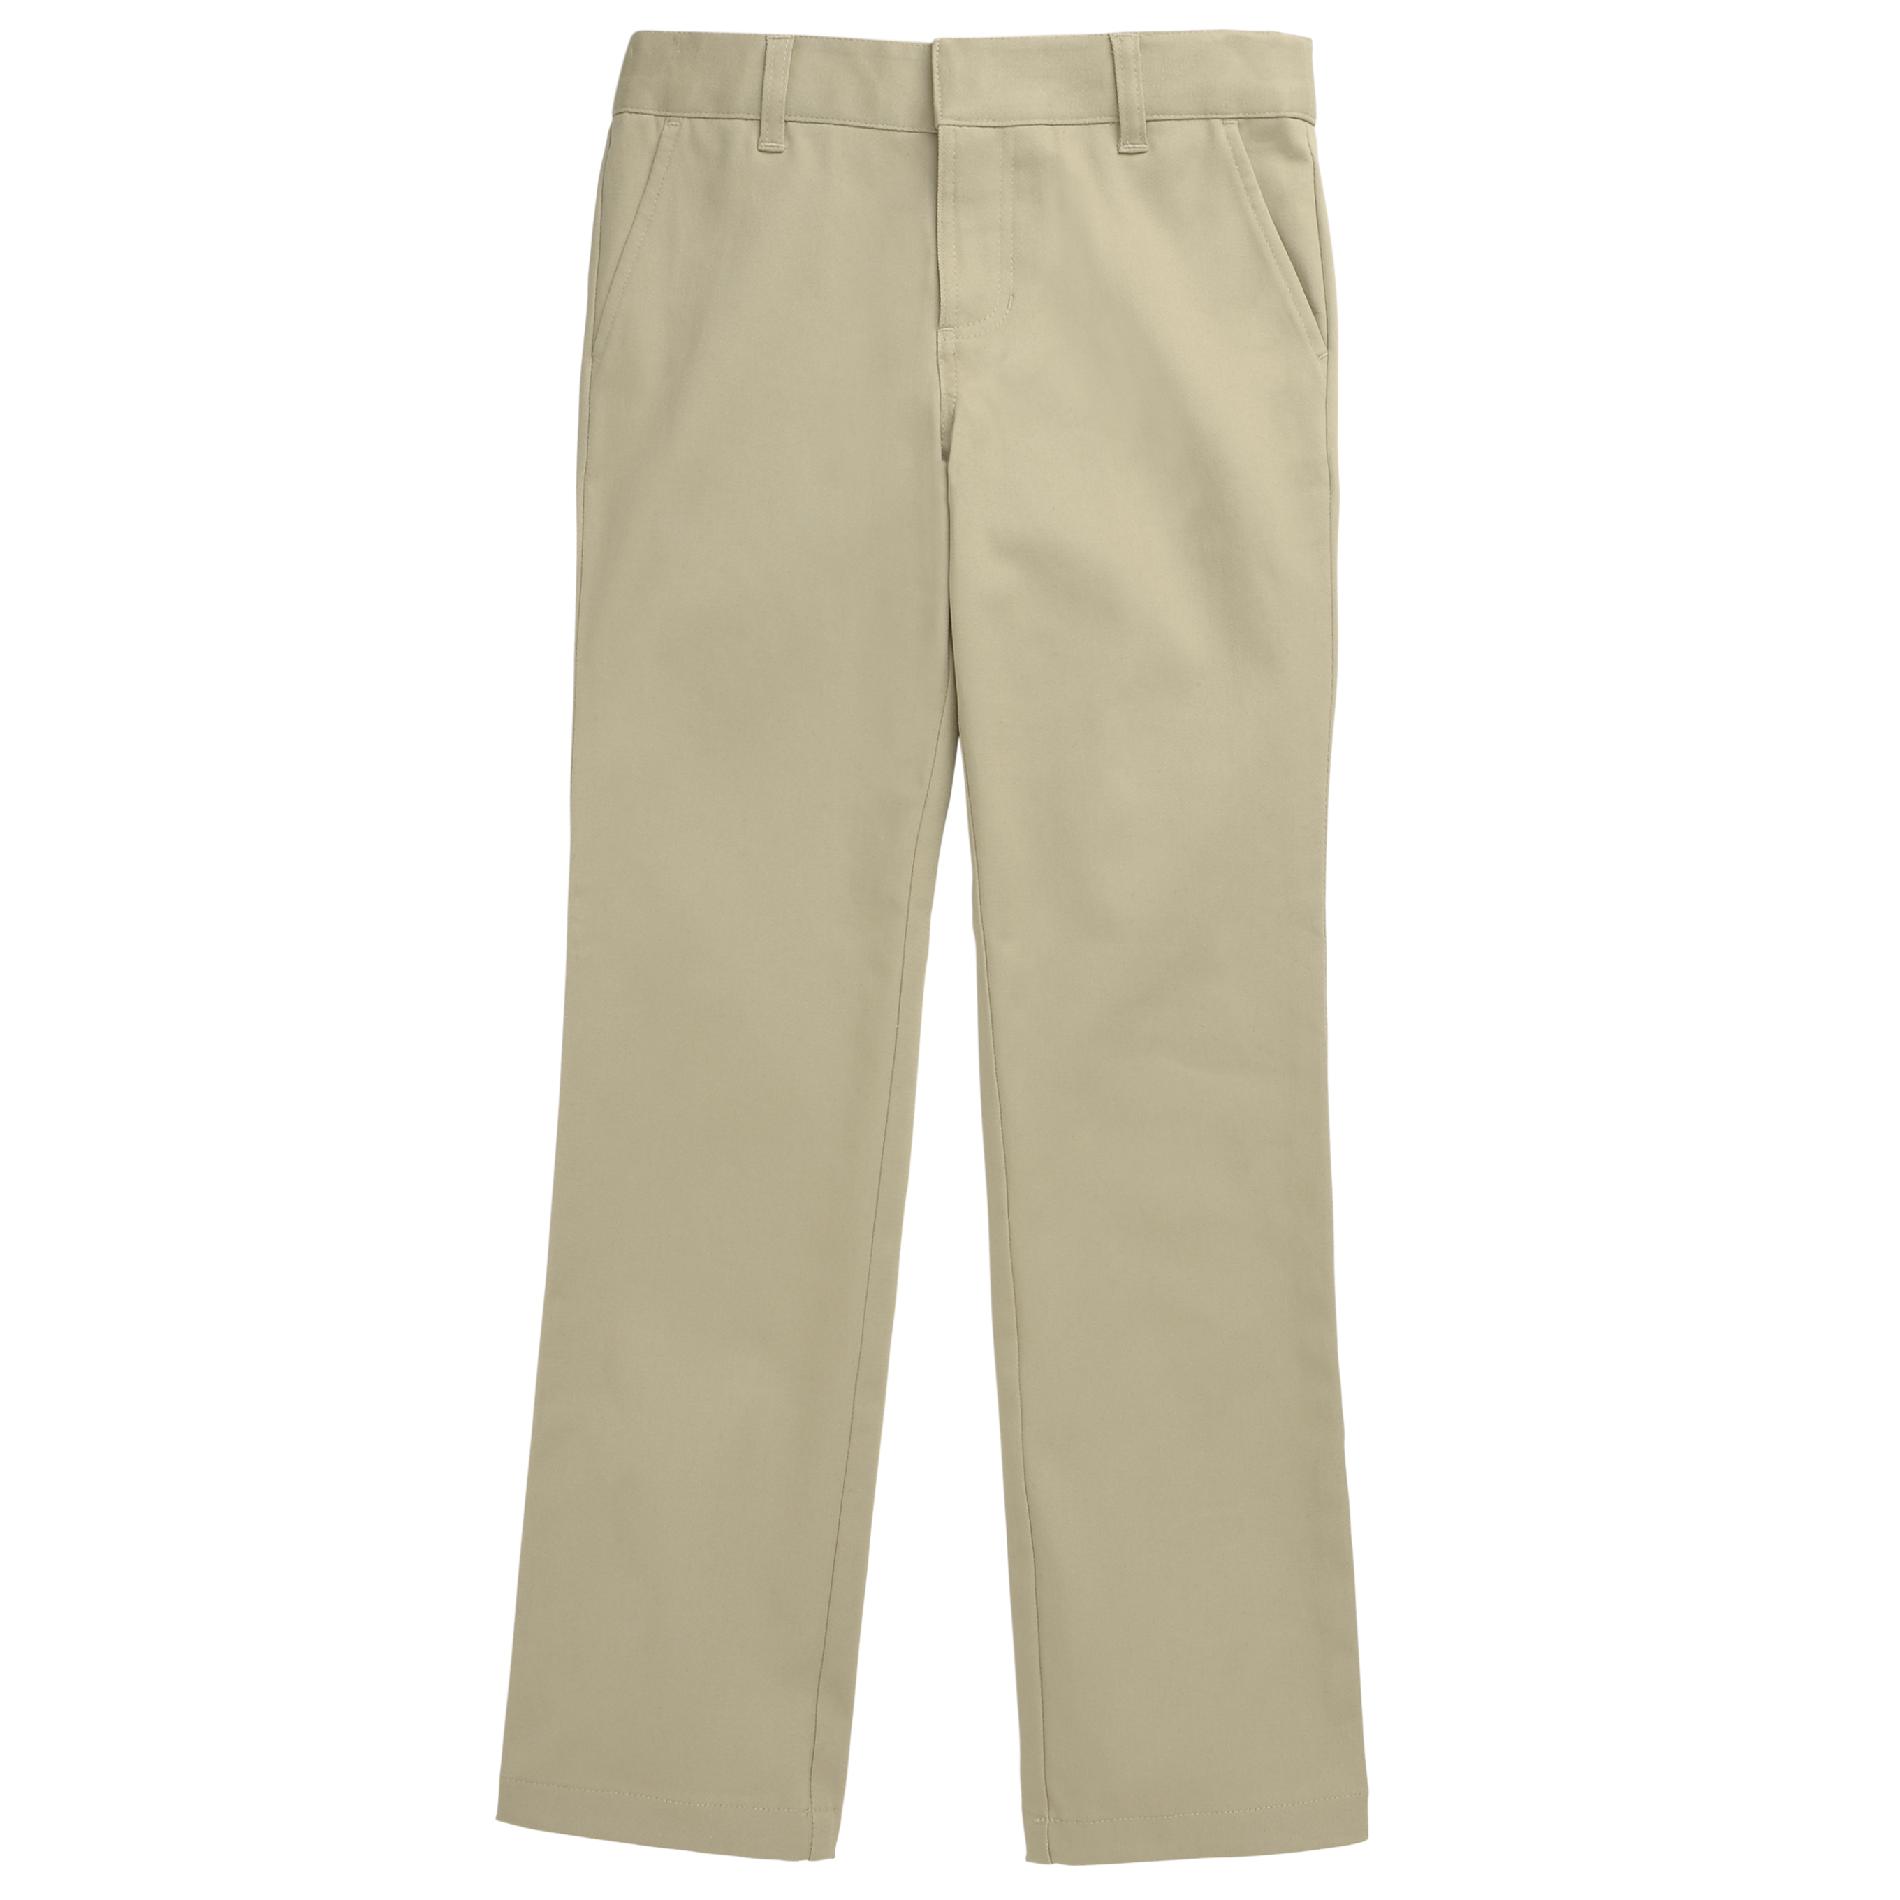 At School by French Toast Girls Plus Stretch Straight Leg Pant